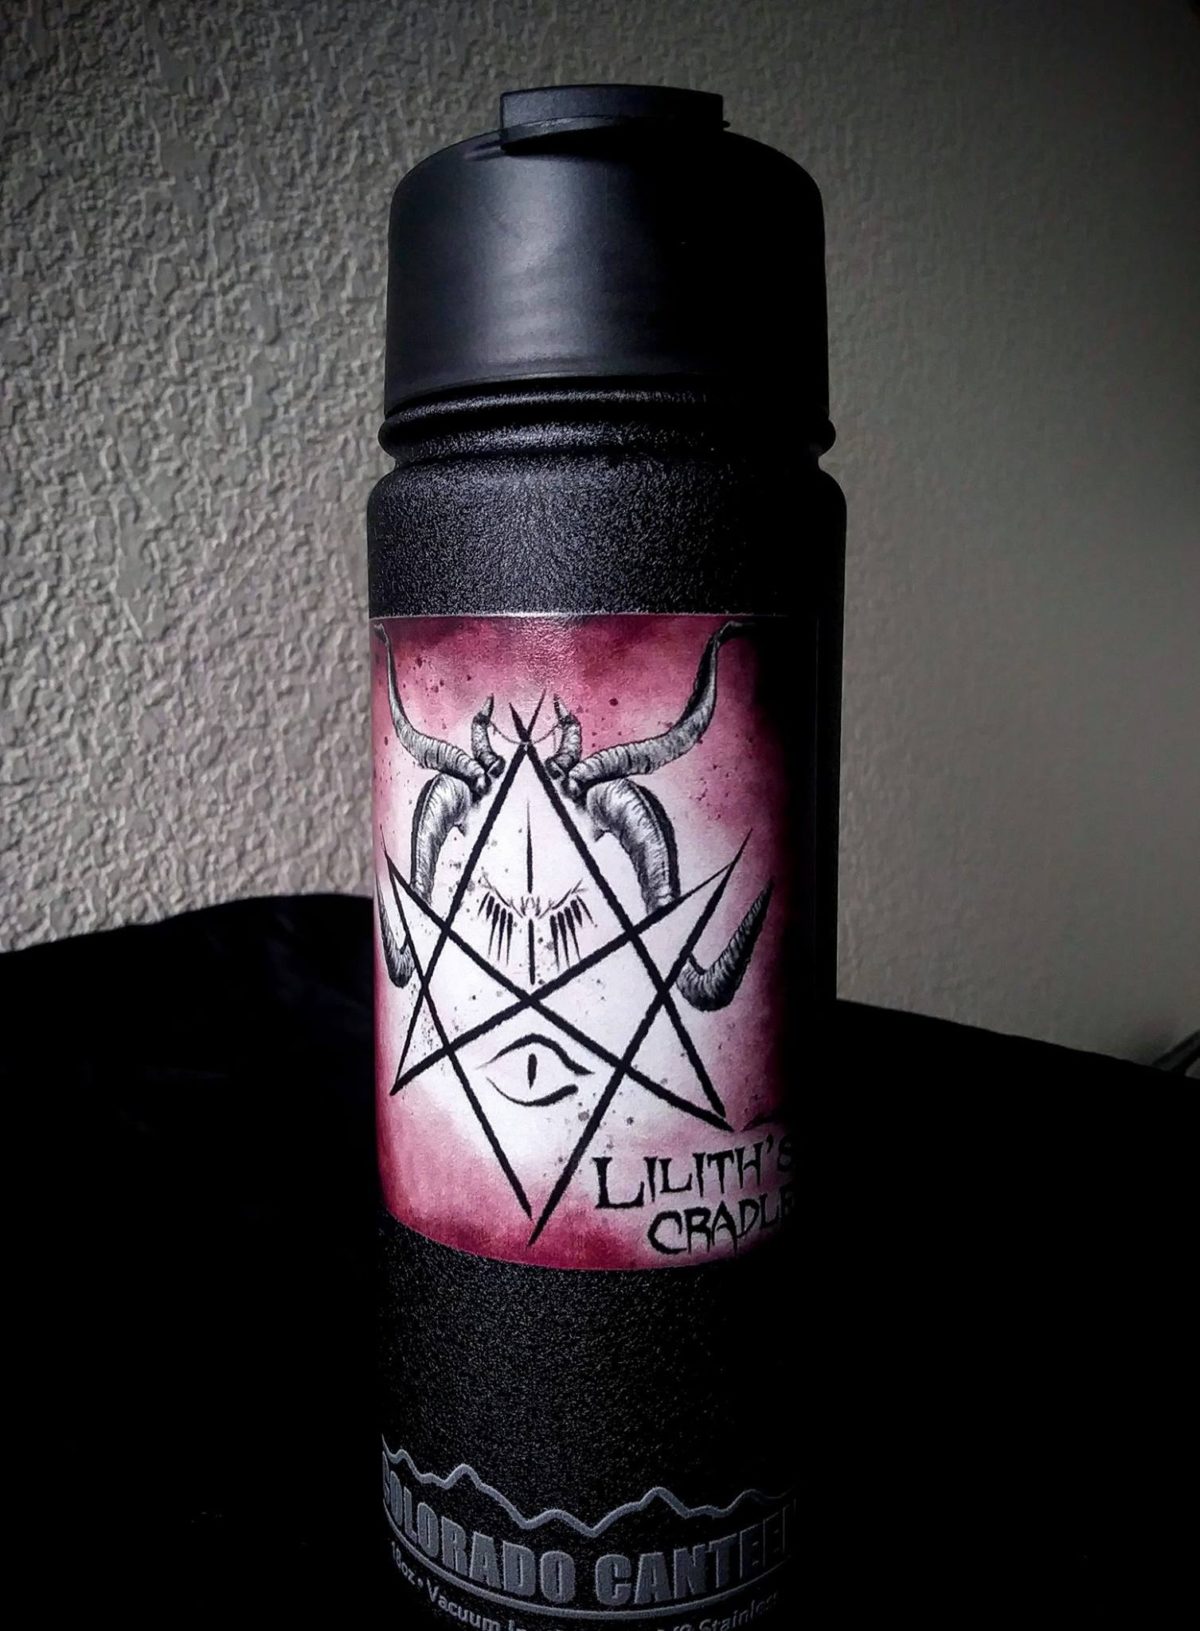 Lilith’s Cradle’s free Bottle Giveaway, details within  .  .